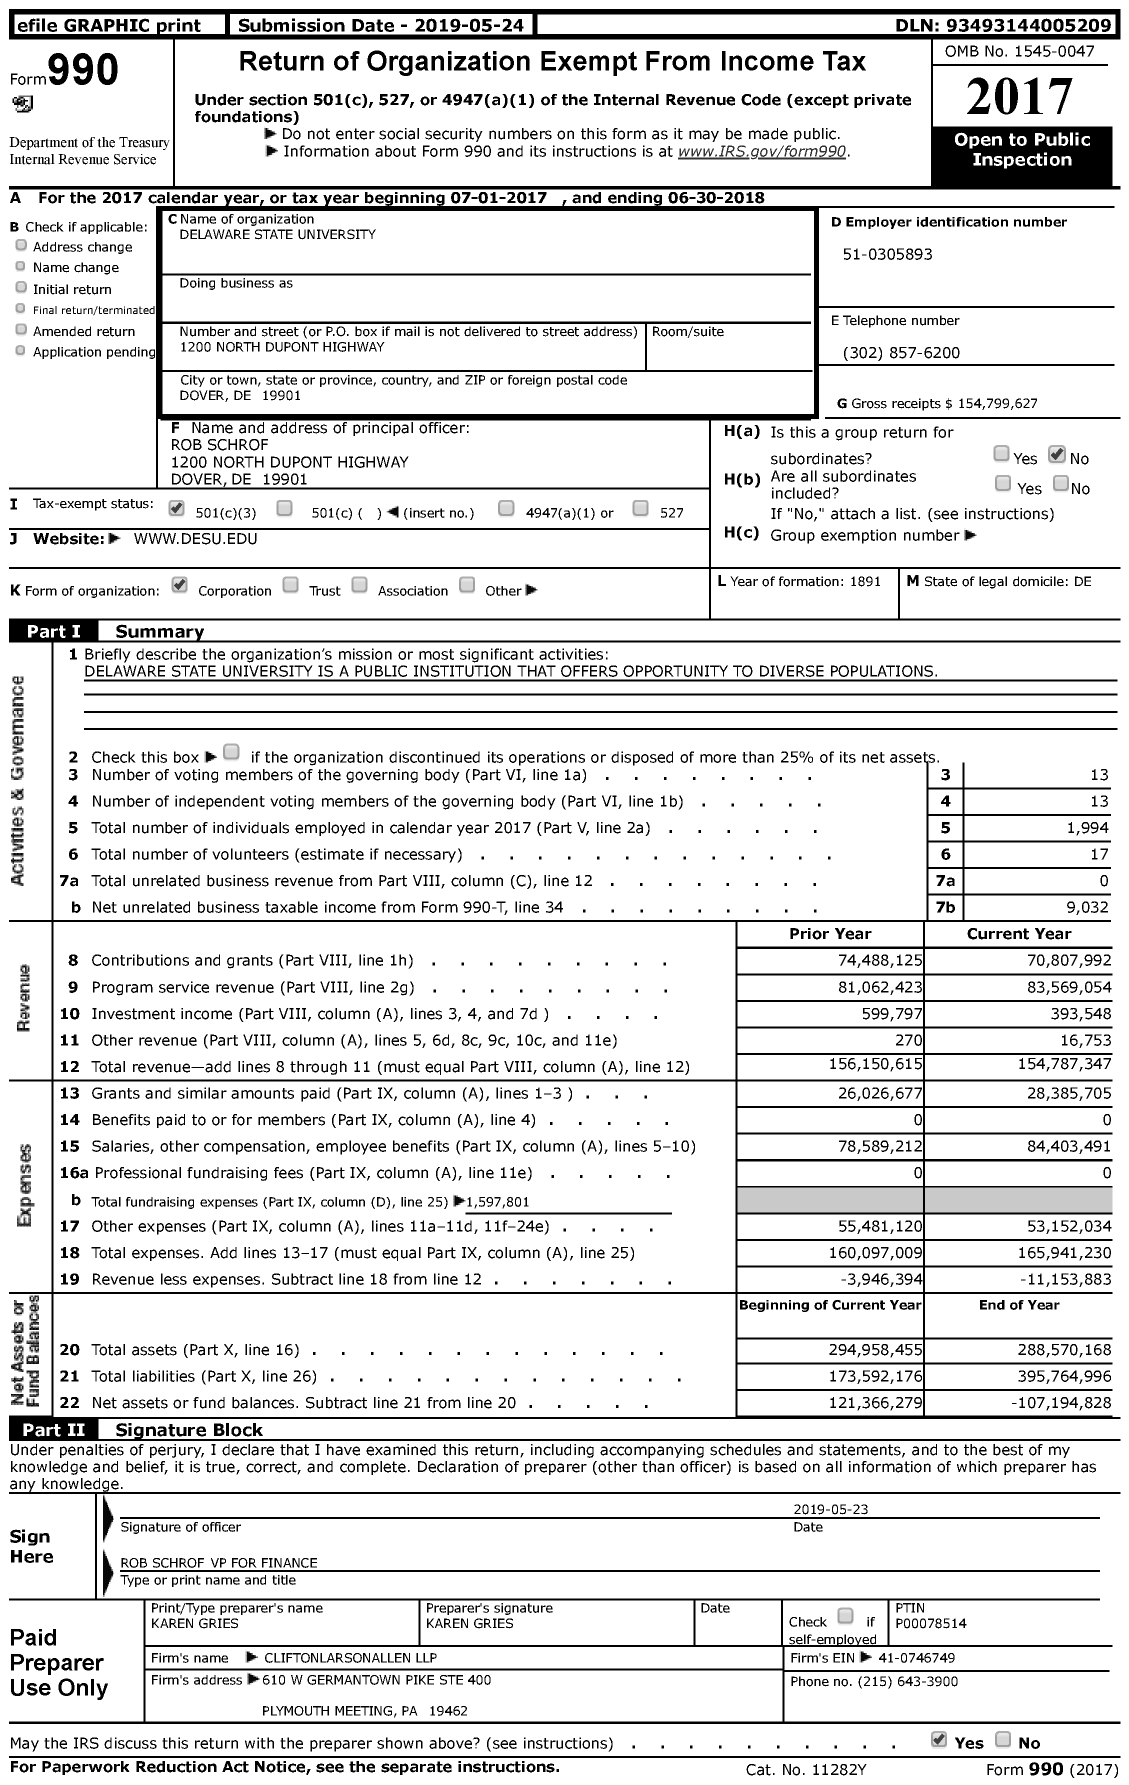 Image of first page of 2017 Form 990 for Delaware State University (DSU)